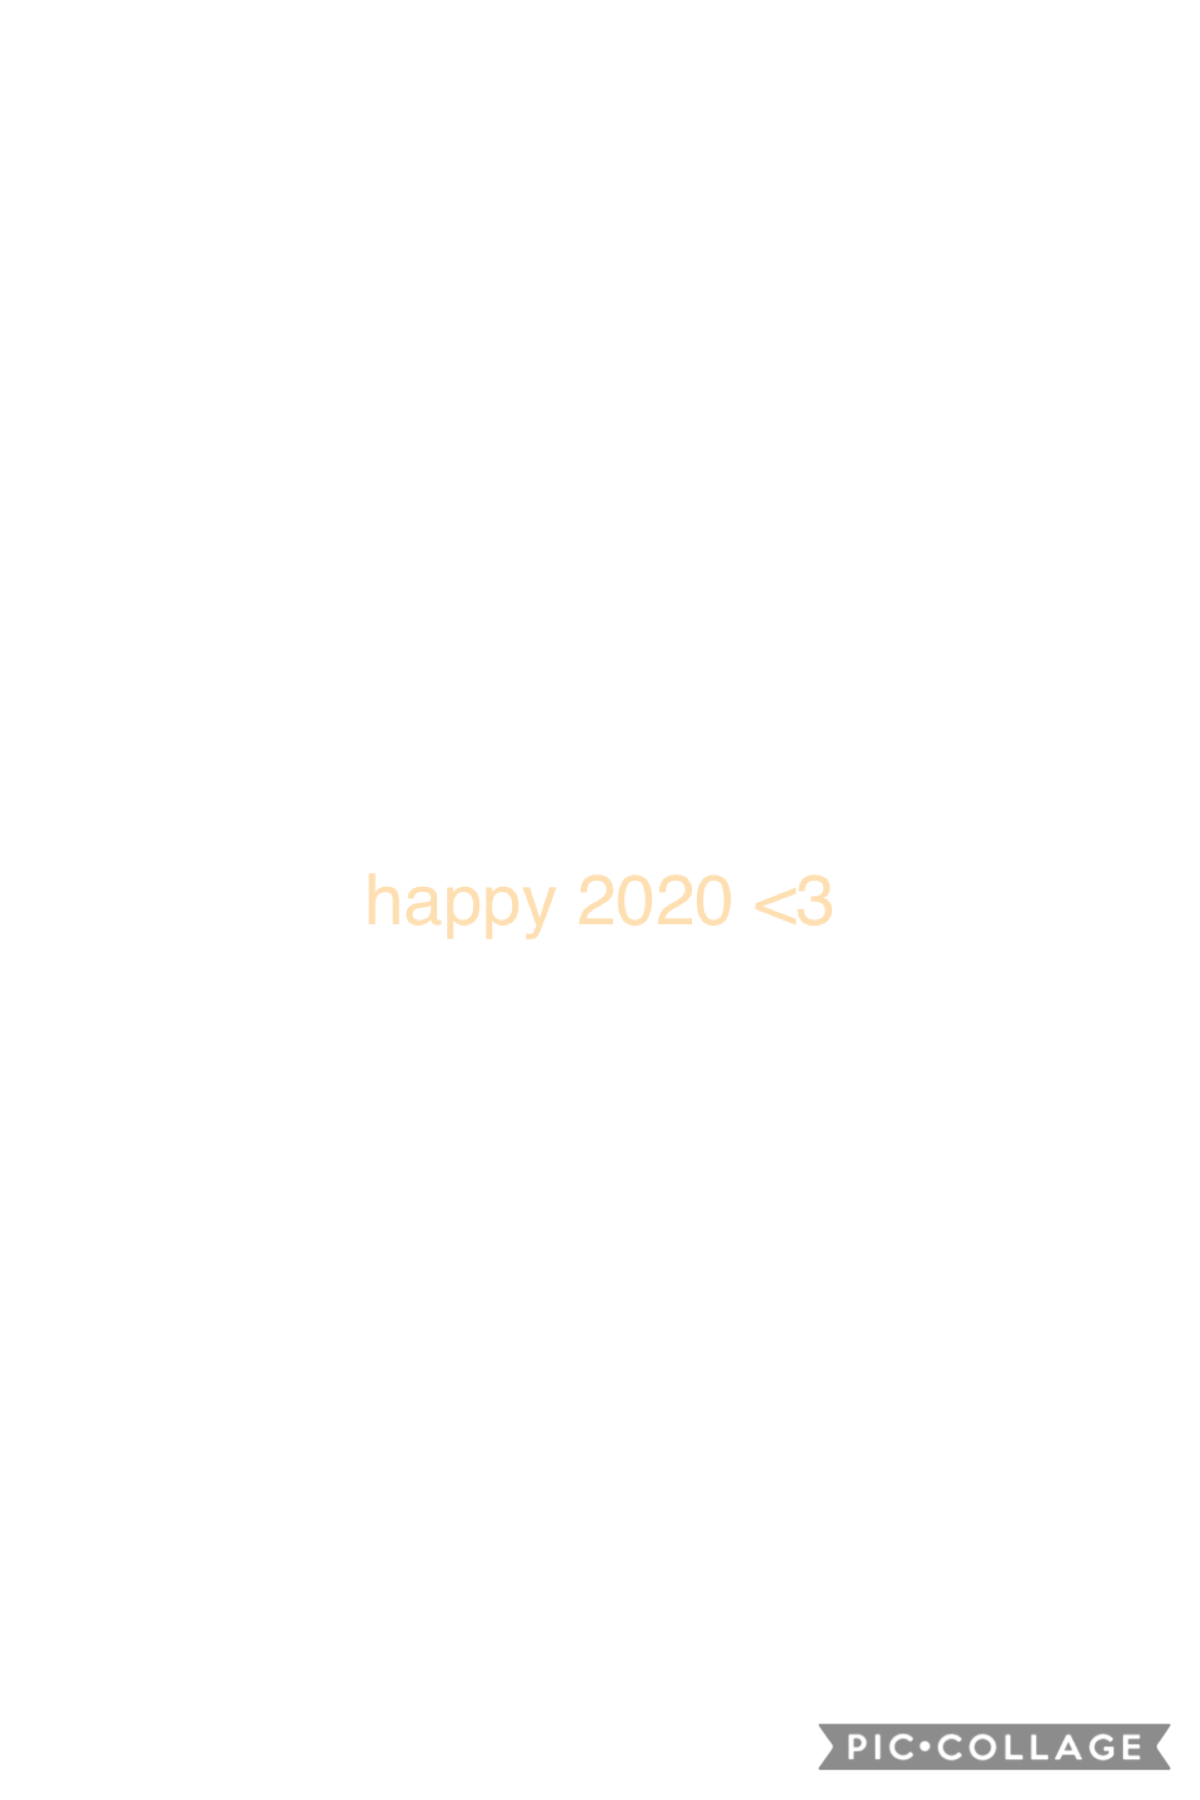 click

I’m a little late but happy 2020!💗😁